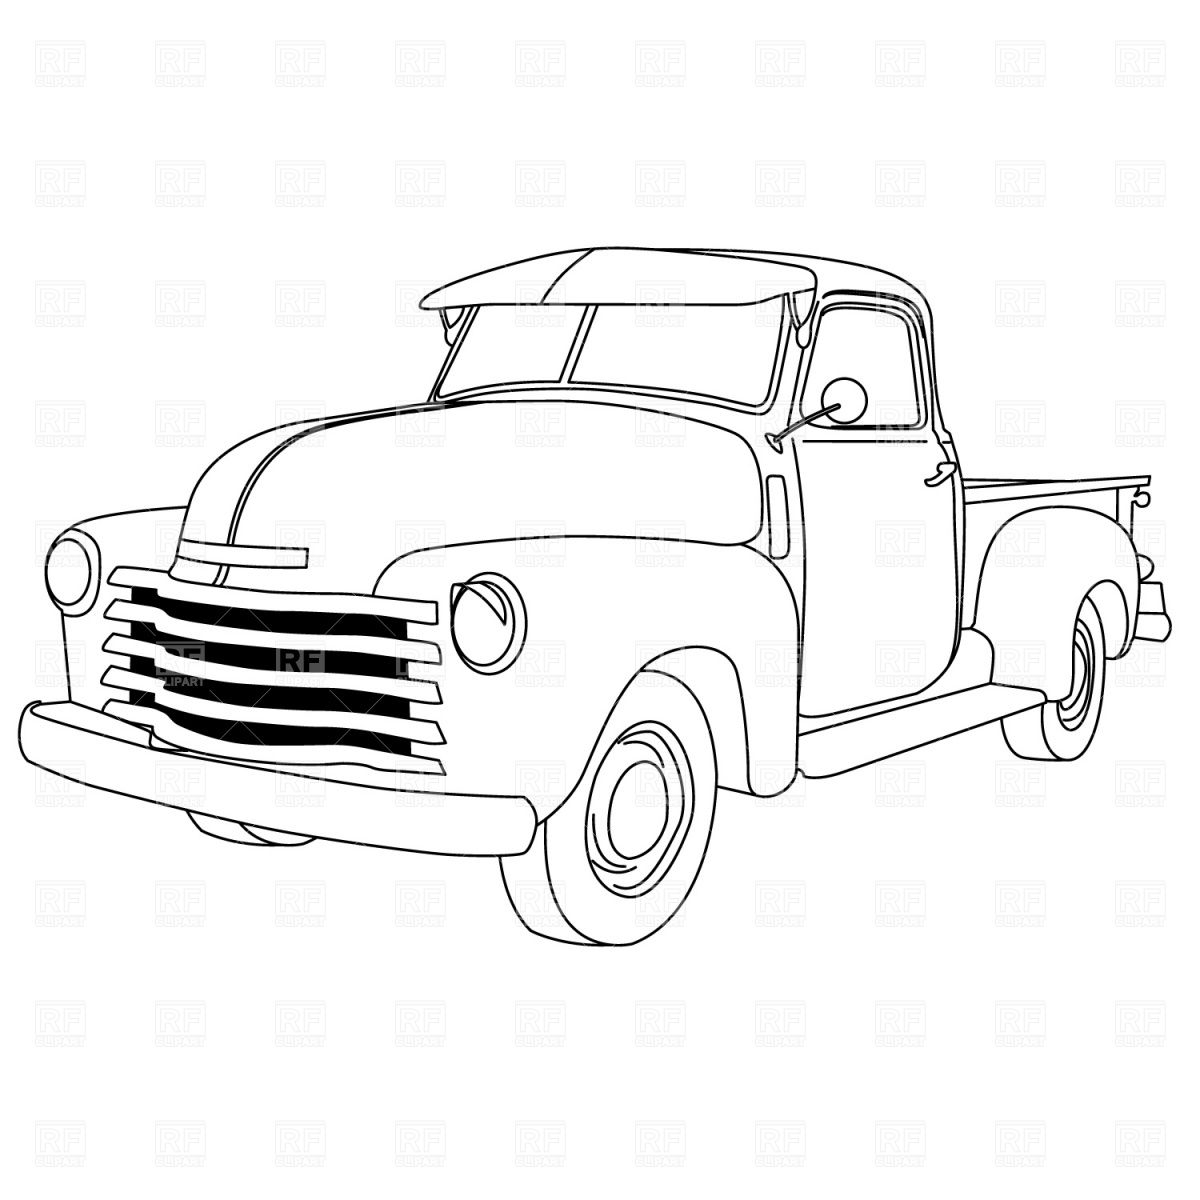 Cool Truck Coloring Pages at Free printable